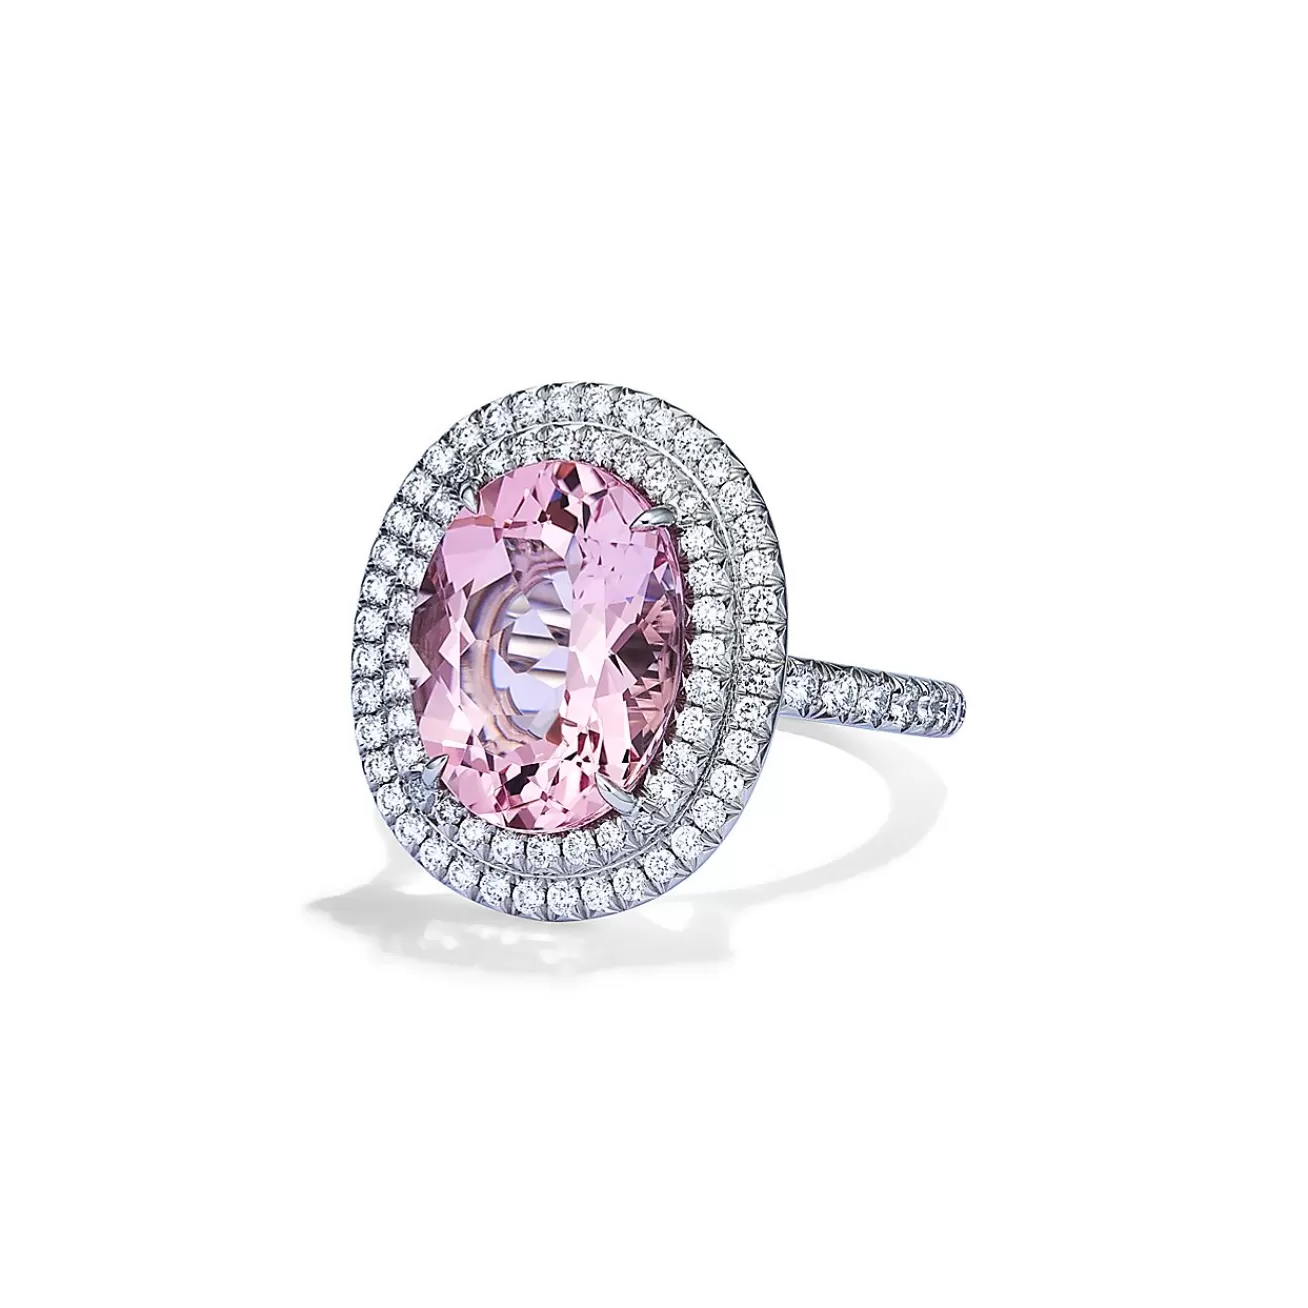 Tiffany & Co. Ring in Platinum with a Morganite and Diamonds | ^ Rings | Diamond Jewelry